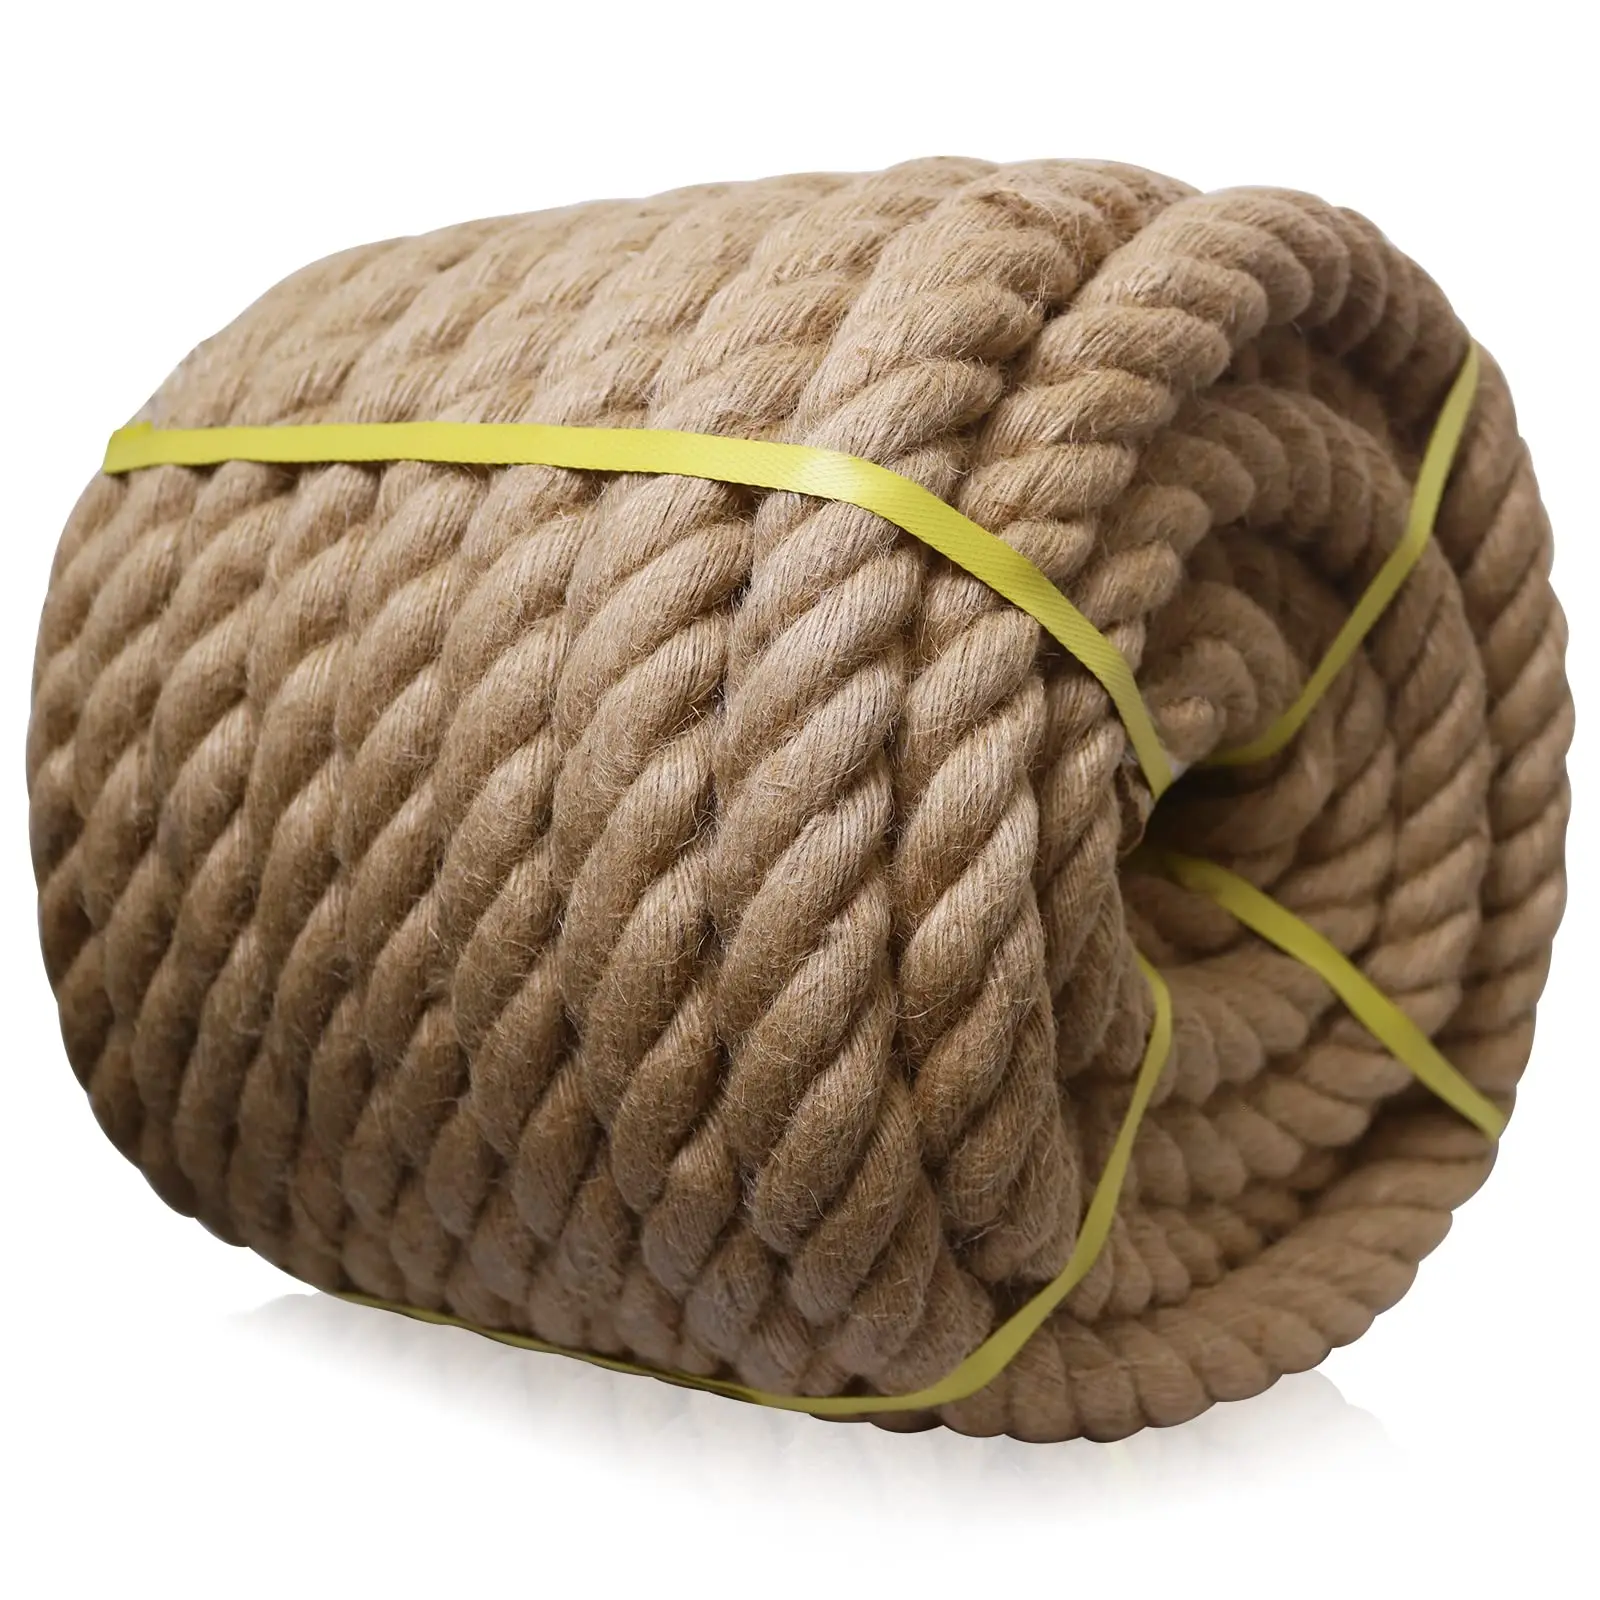 

Twisted Manila Rope 4 Strands Twisted Jute Rope Natural Hemp Rope-Thick Hemp Rope for Crafting Swing Bed Railing Docks Garden